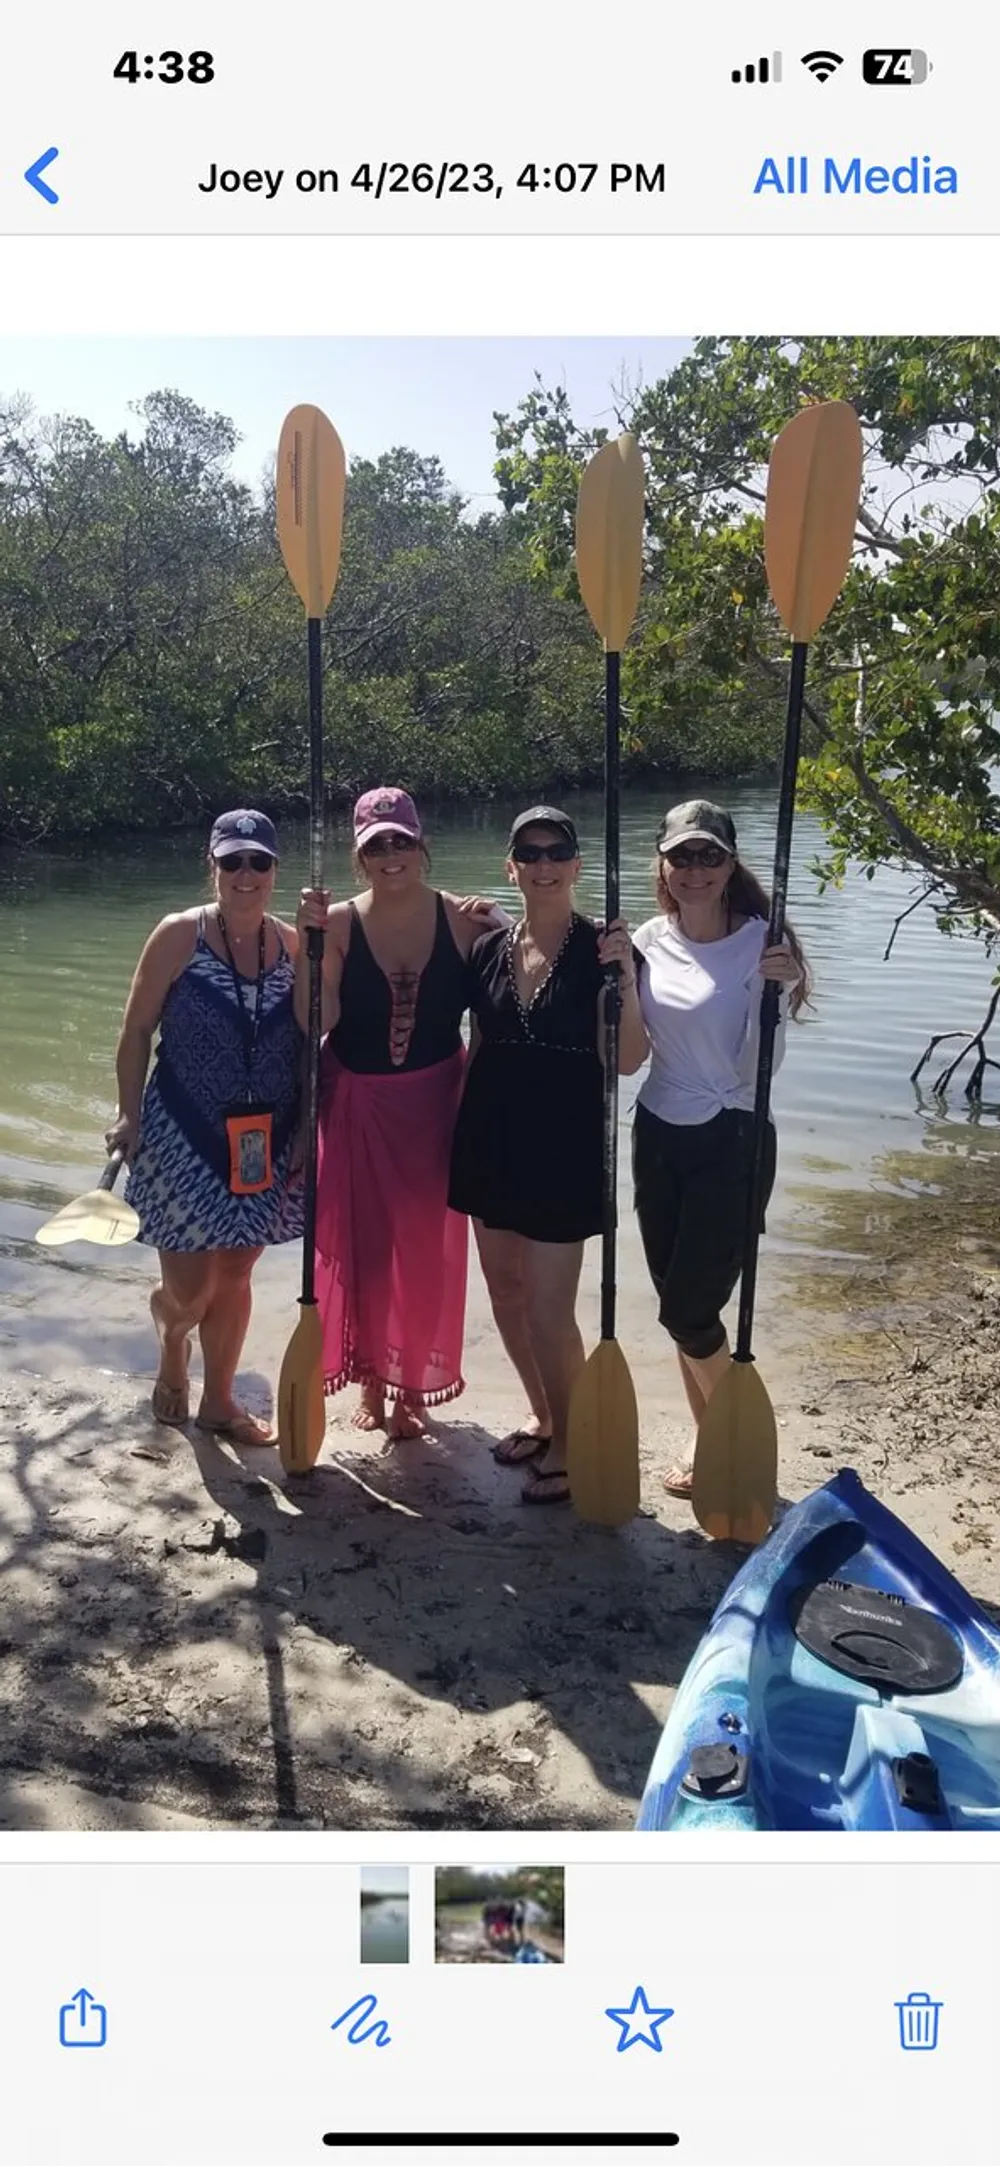 Four people are standing on a beach holding kayak paddles with mangroves in the background